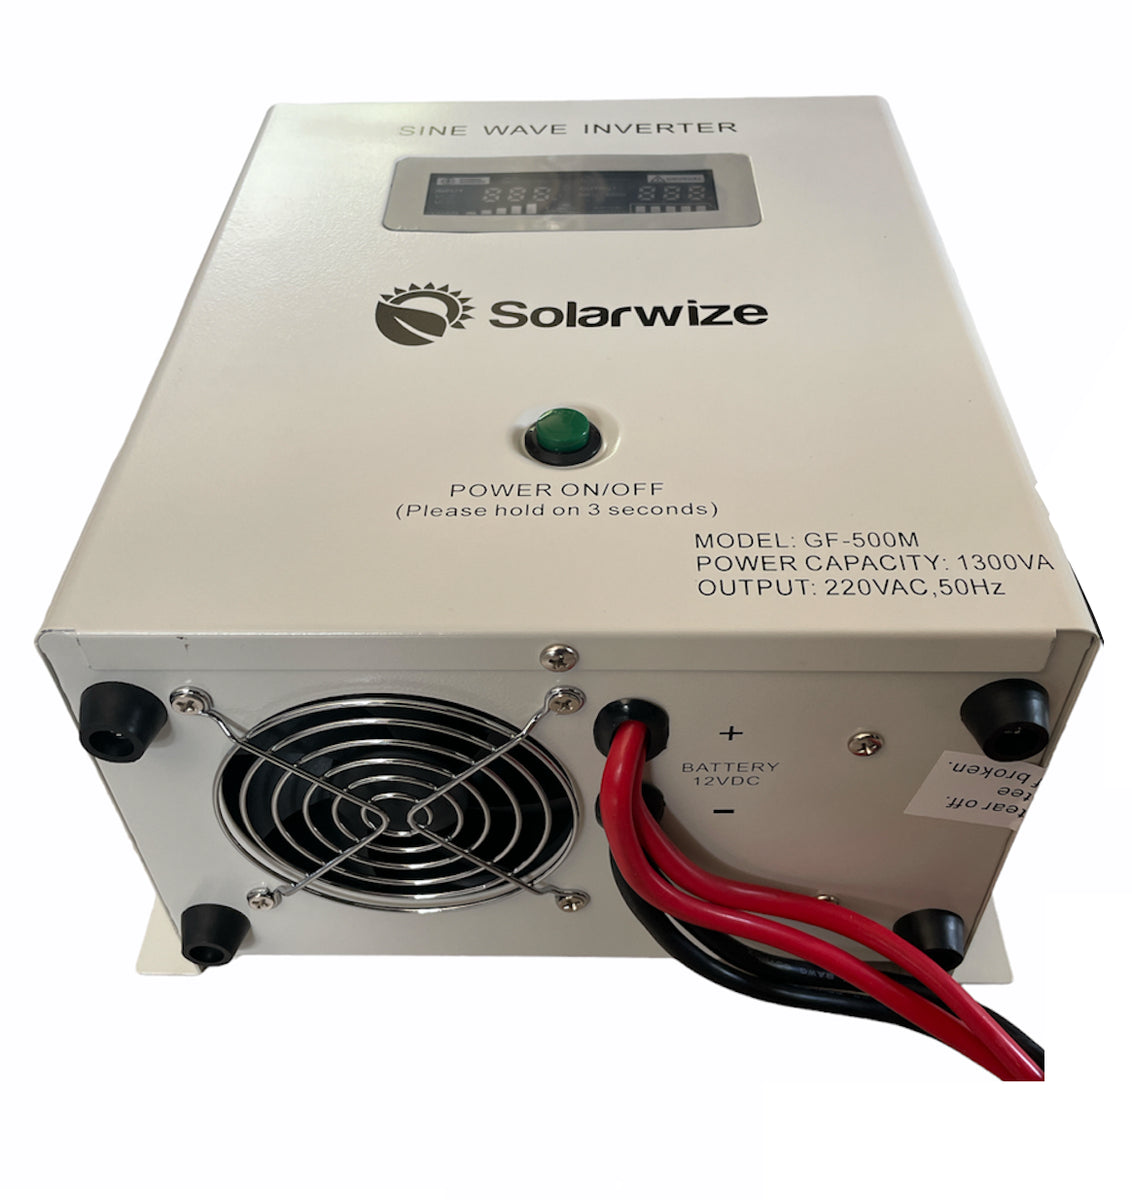 Solarwize MDF Sine Wave Power 800w Inverter UPS With Built In Battery Charger